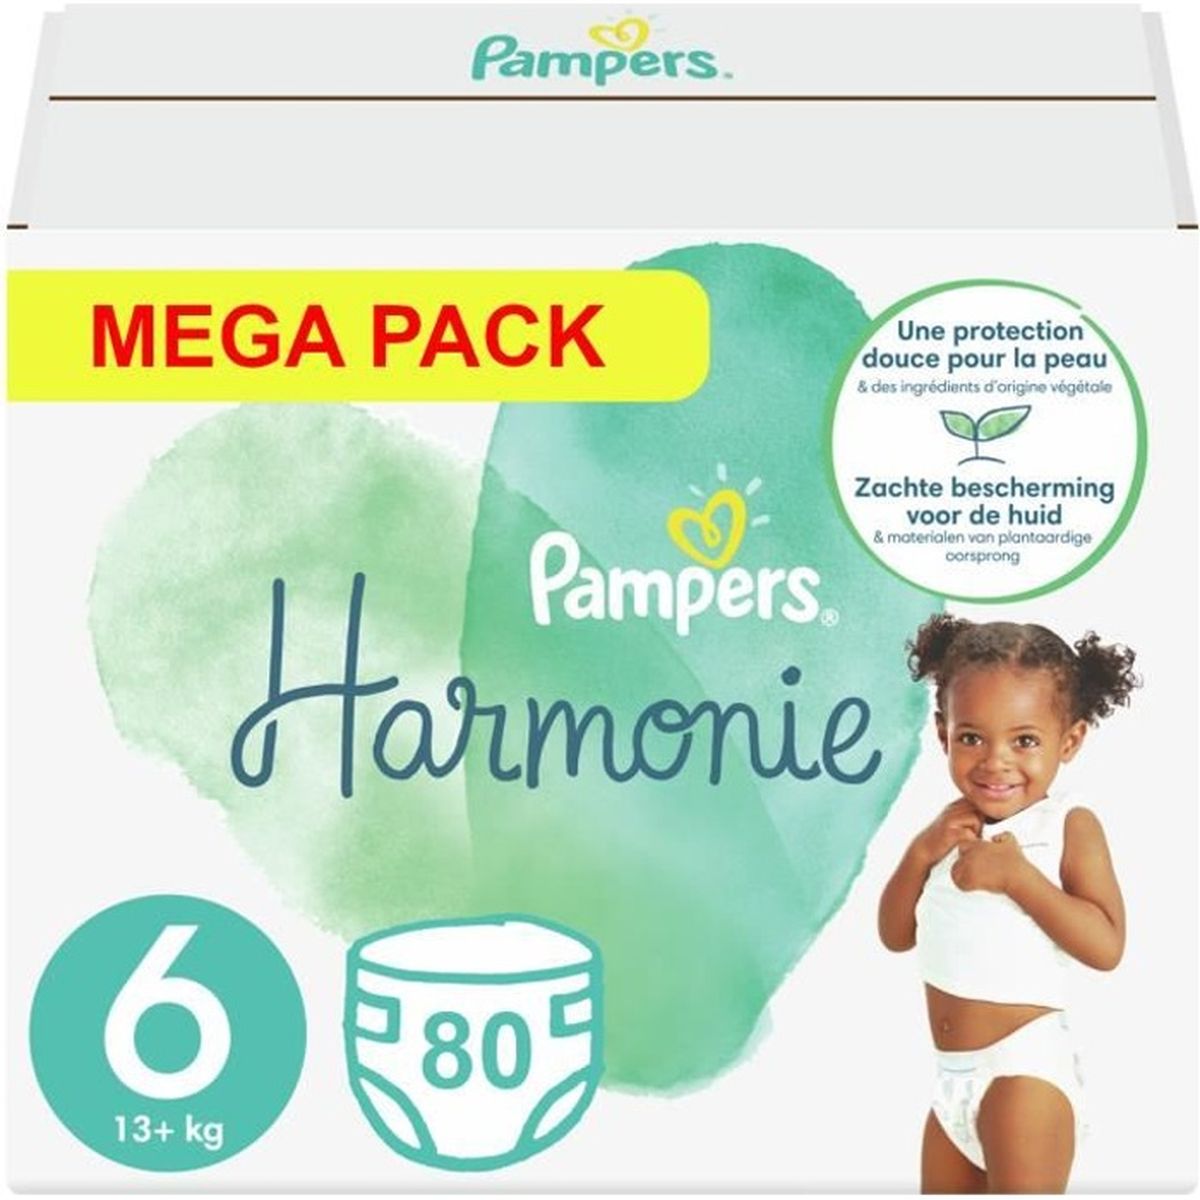 Pampers New Baby Harmonie Couches Taille 2 104 Couches 4 kg - 8 kg -  Cdiscount Puériculture & Eveil bébé